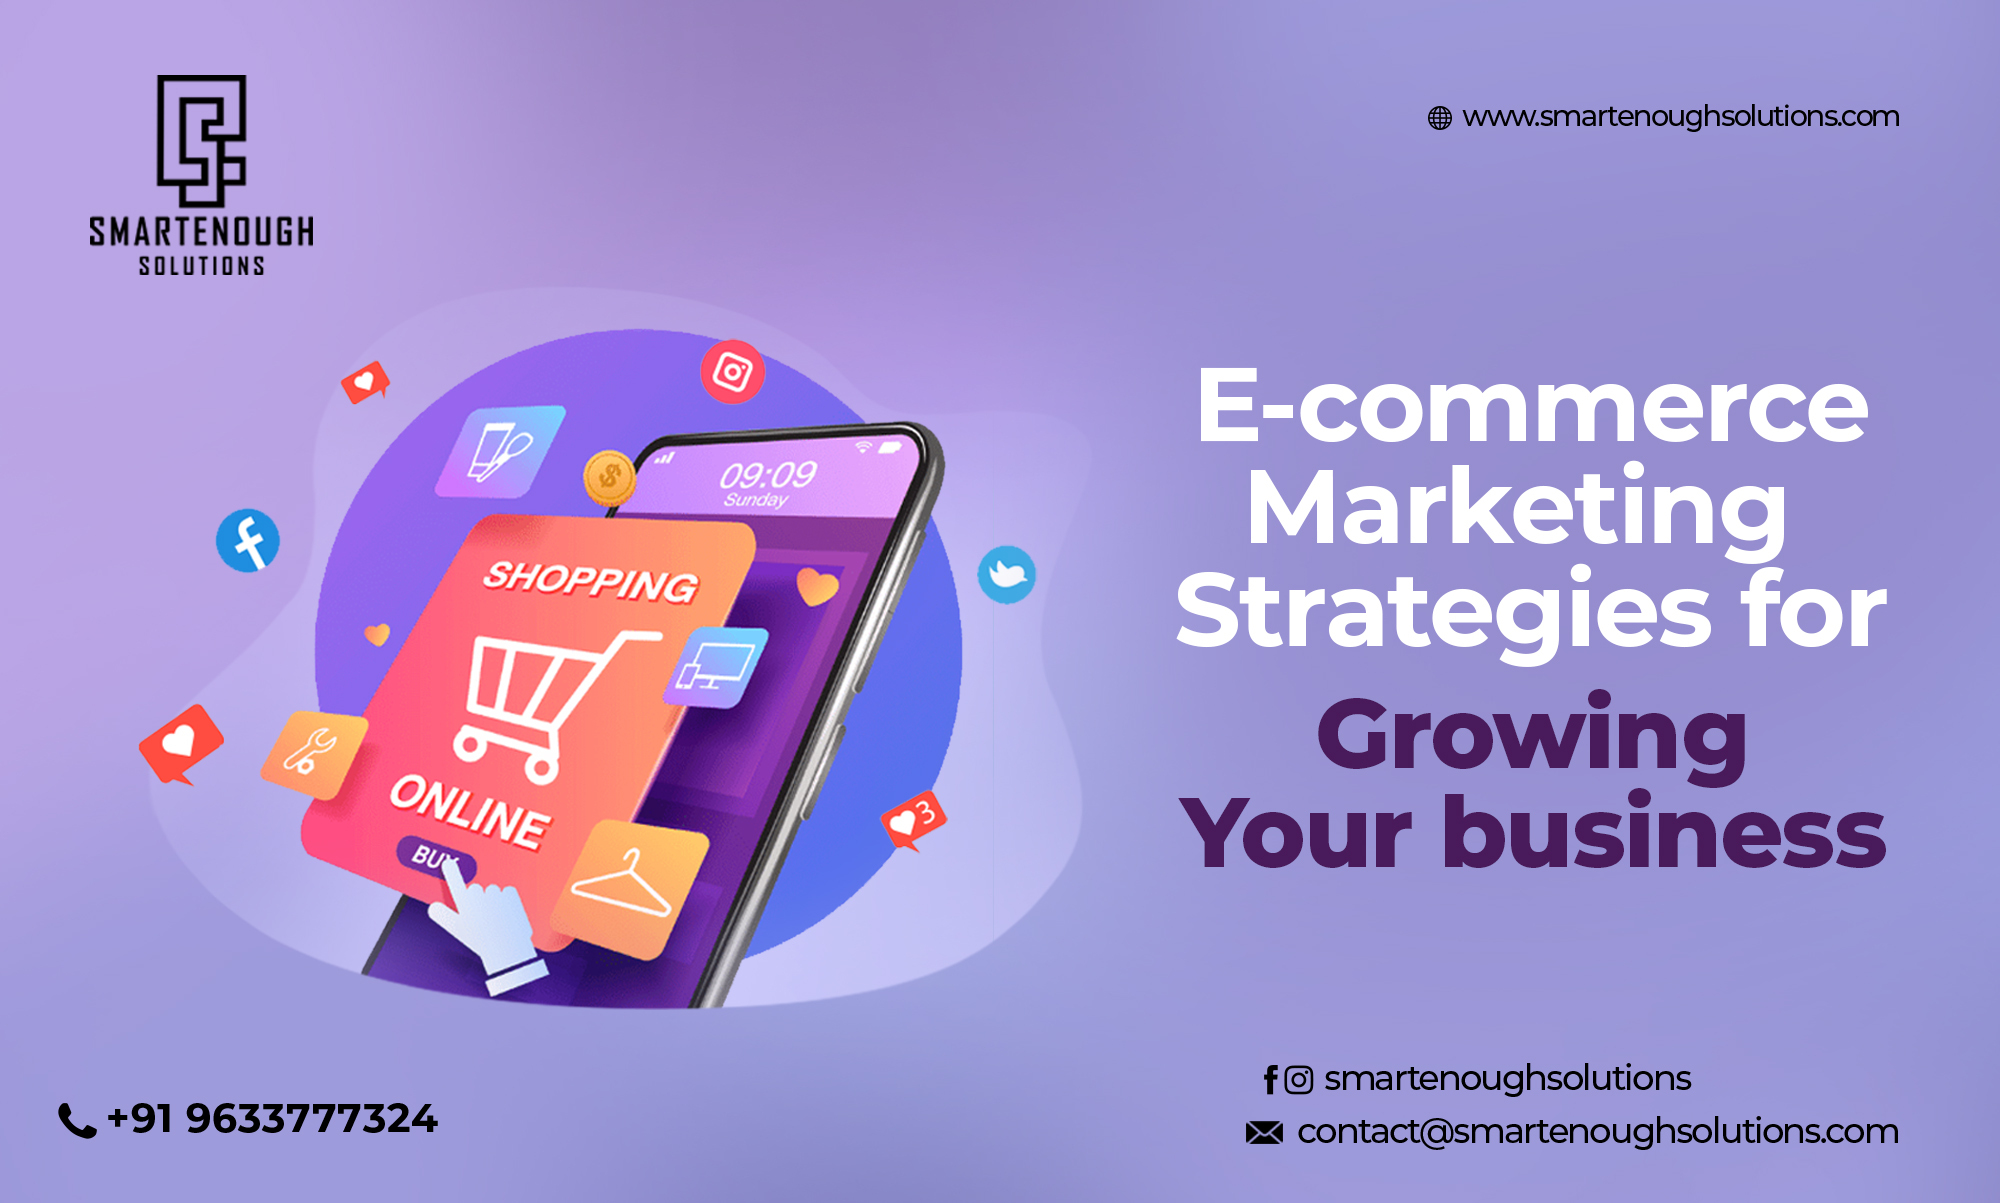 E-COMMERCE MARKETING STRATEGIES FOR GROWING YOUR BUSINESS